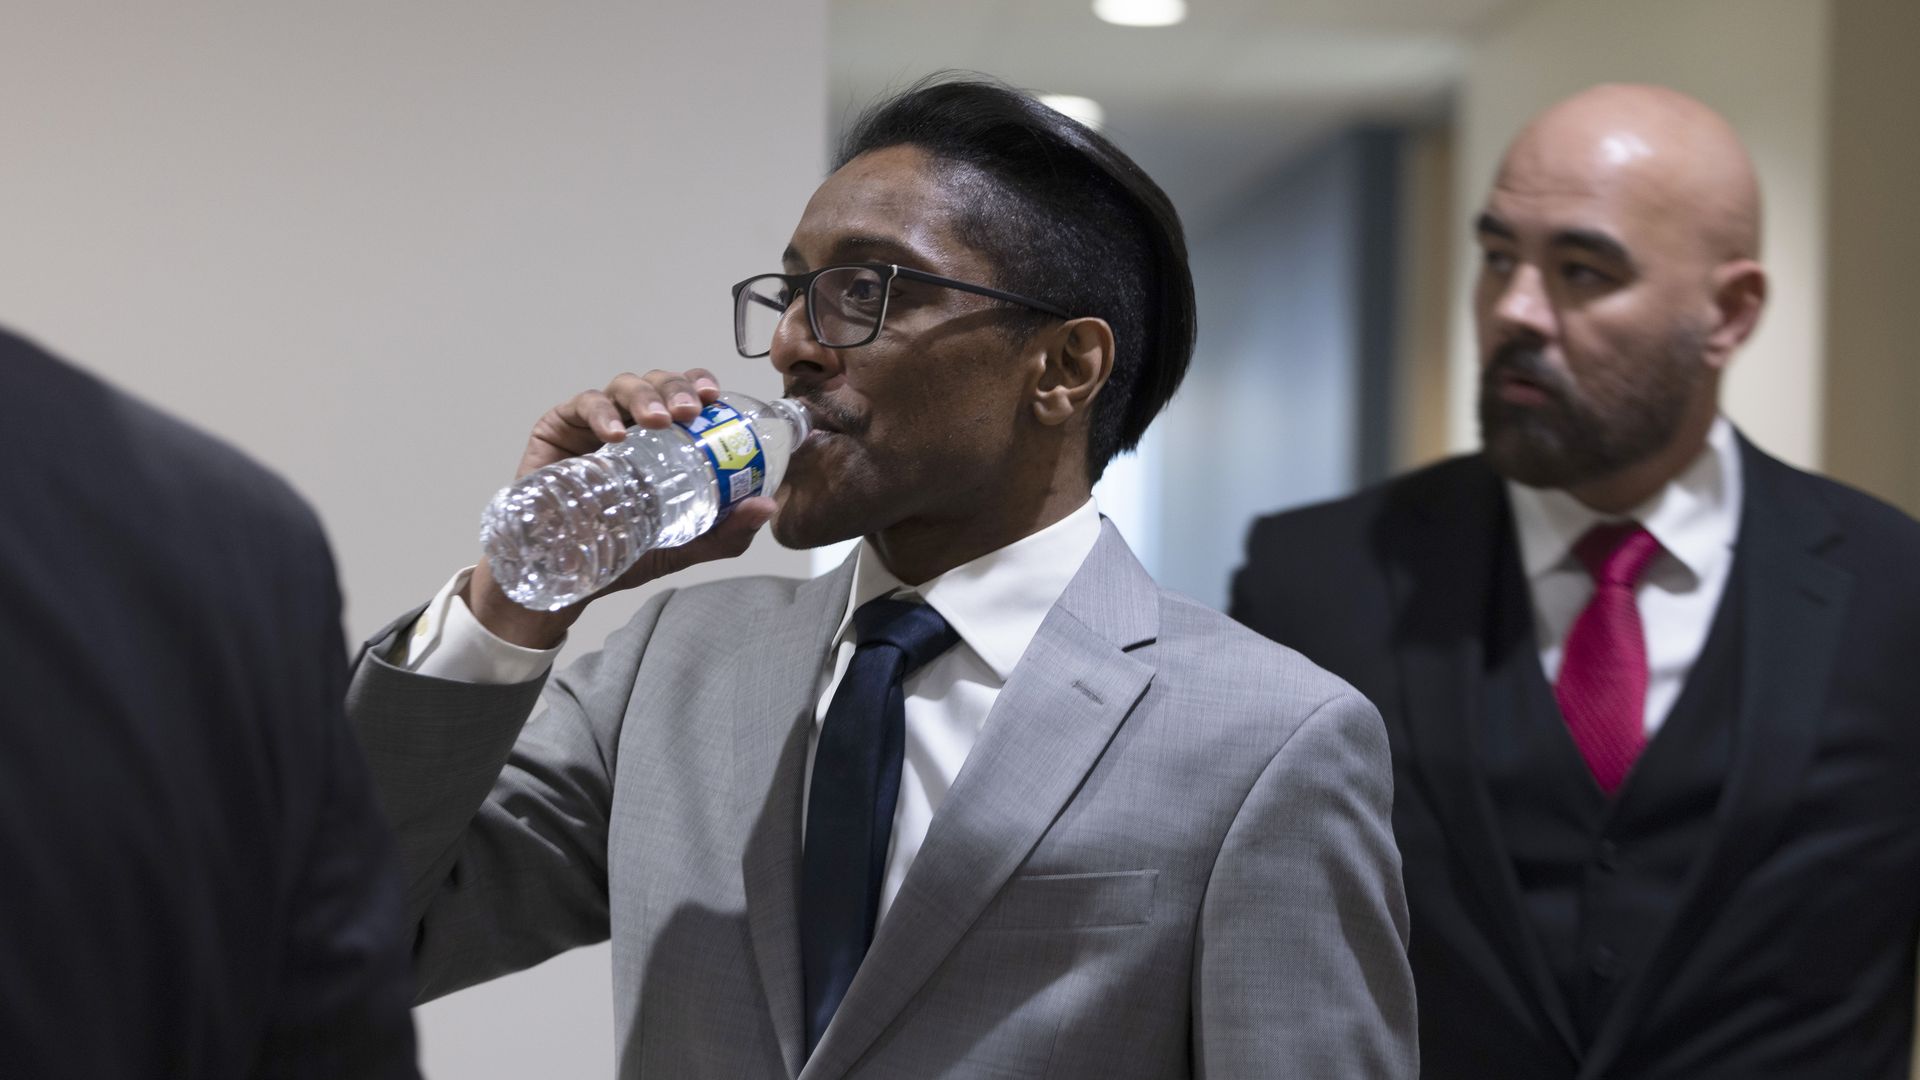 Photo of Ali Alexander drinking water from a plastic bottle